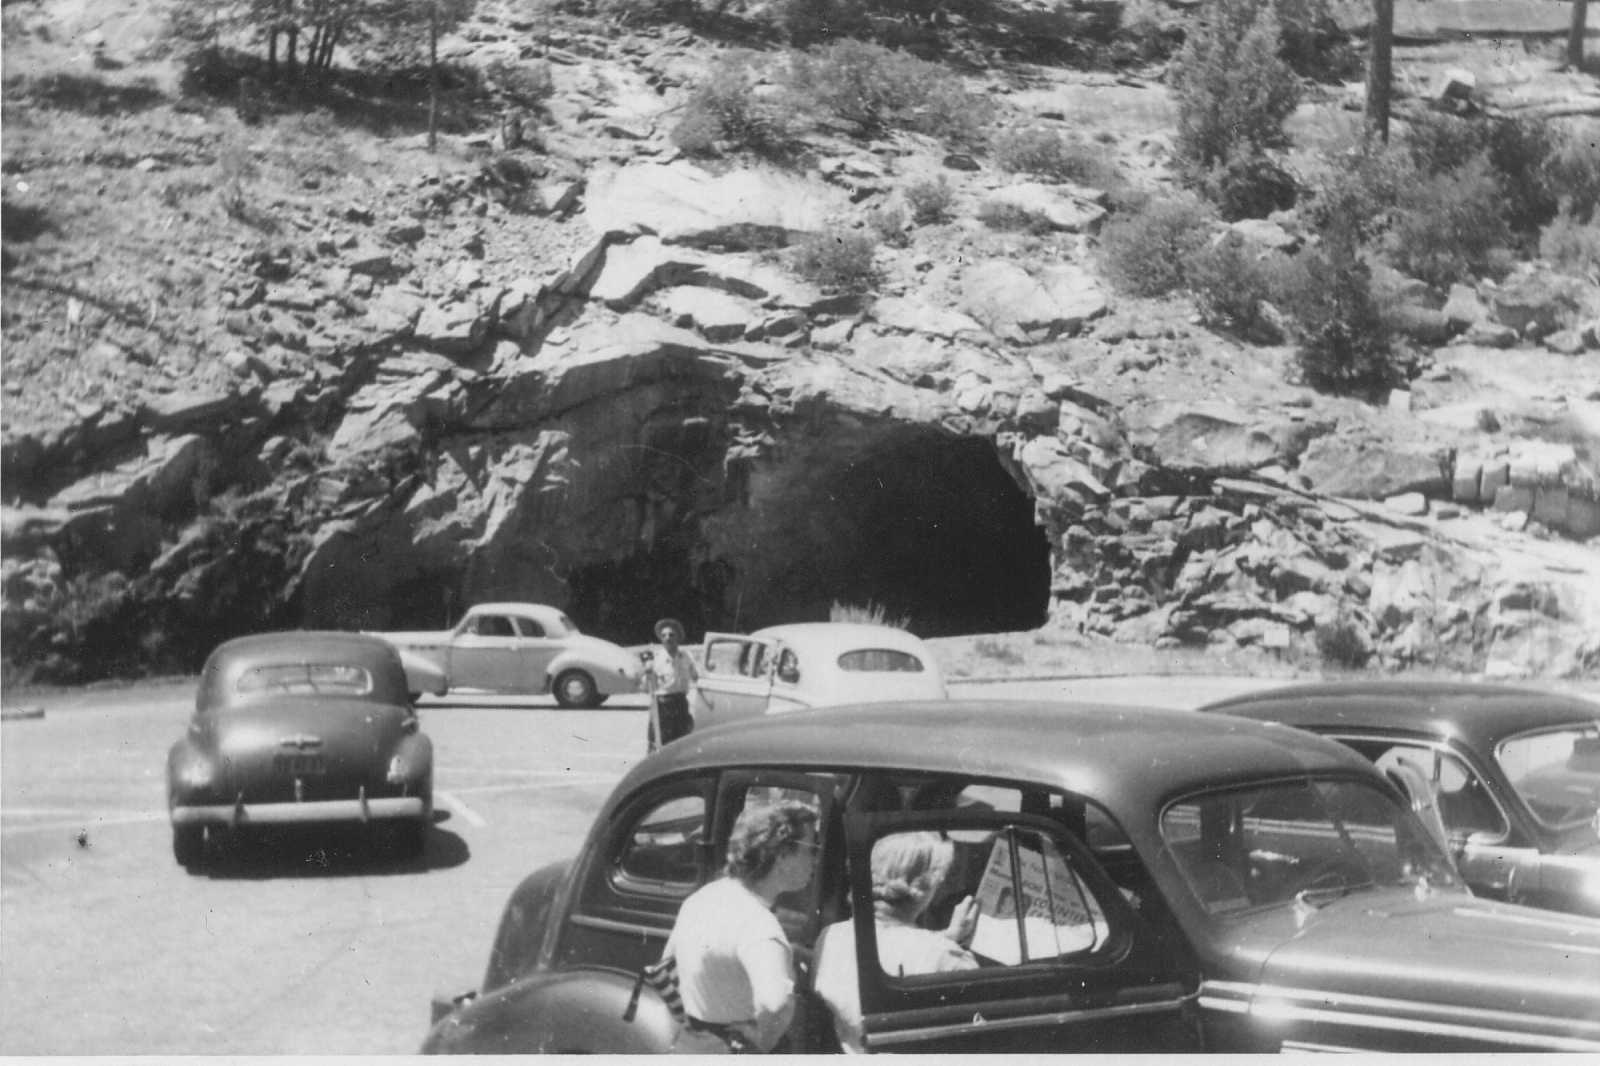 Car tunnel at Yosemite right by a scenic overlook of the Valley. I've been to this spot before about 10 years ago but for the life of me don't remember the name of the spot. View full size.